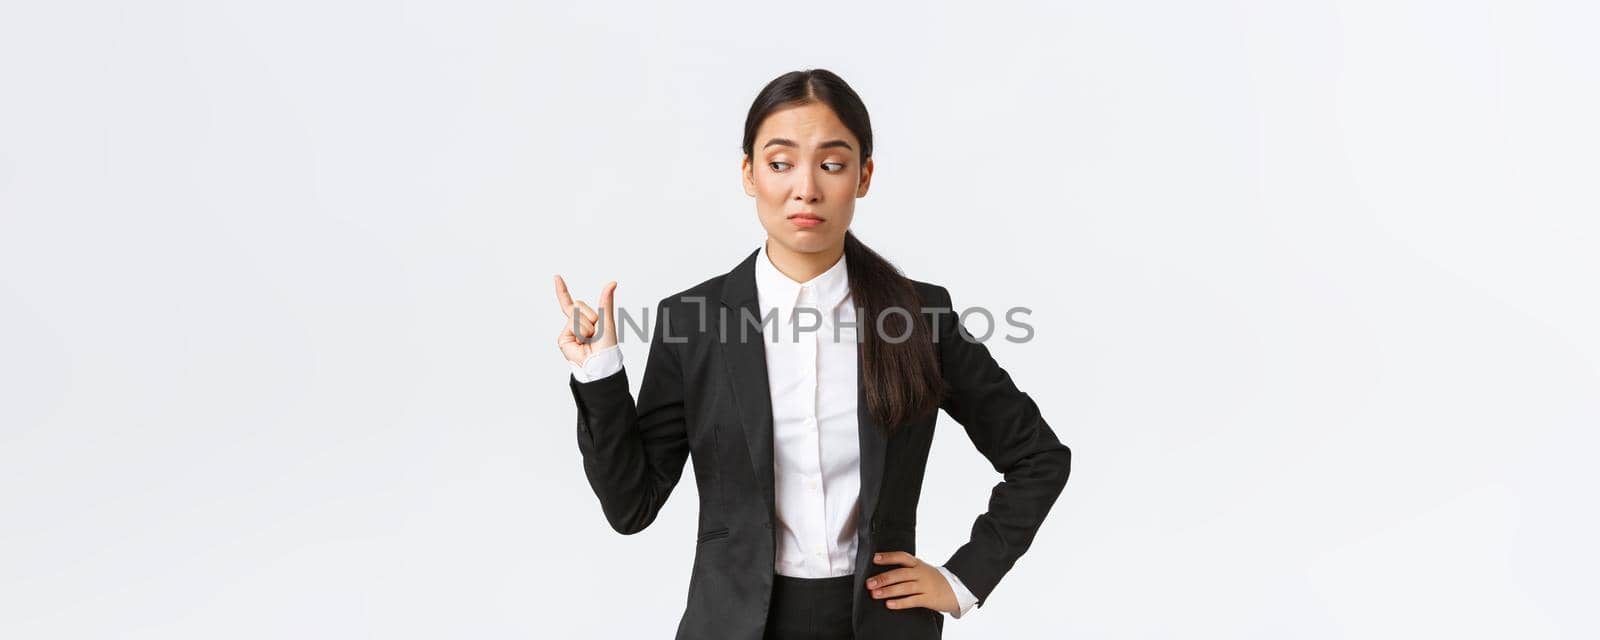 Skeptical and awkward young asian businesswoman, saleswoman in black suit shaping something small and looking disappointed in size, grimacing unamused over little tiny thing, white background.